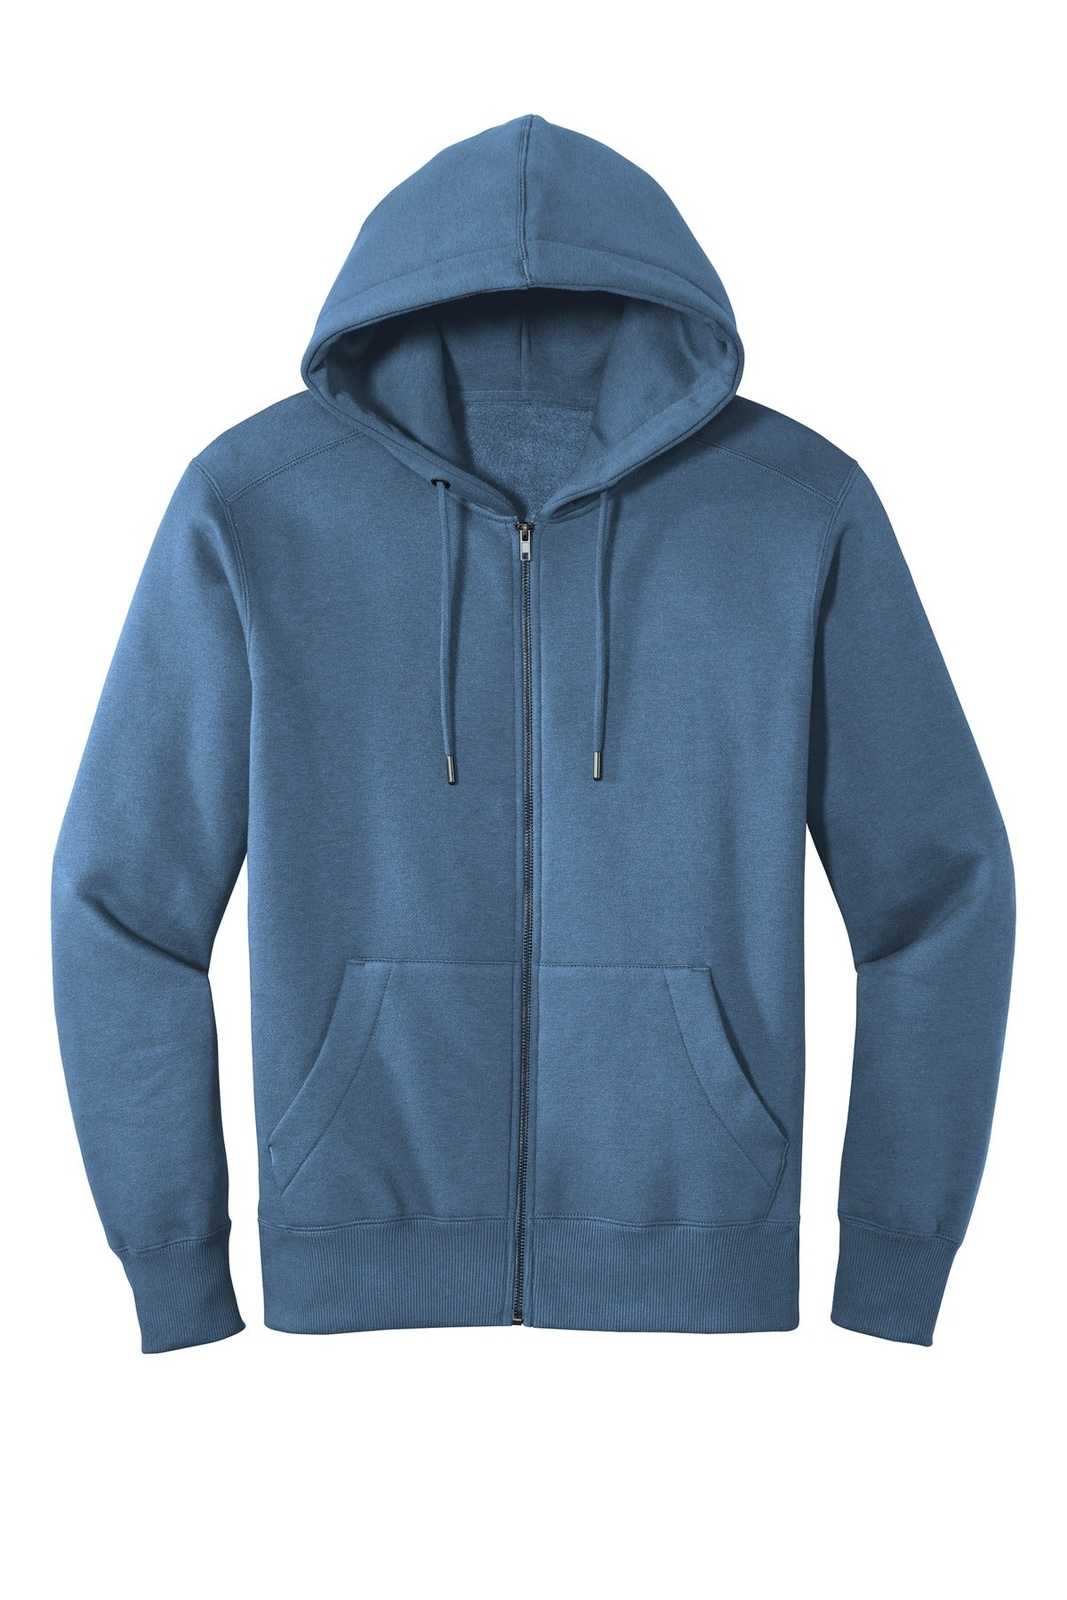 District DT1103 Perfect Weight Fleece Full-Zip Hoodie - Maritime Blue - HIT a Double - 5